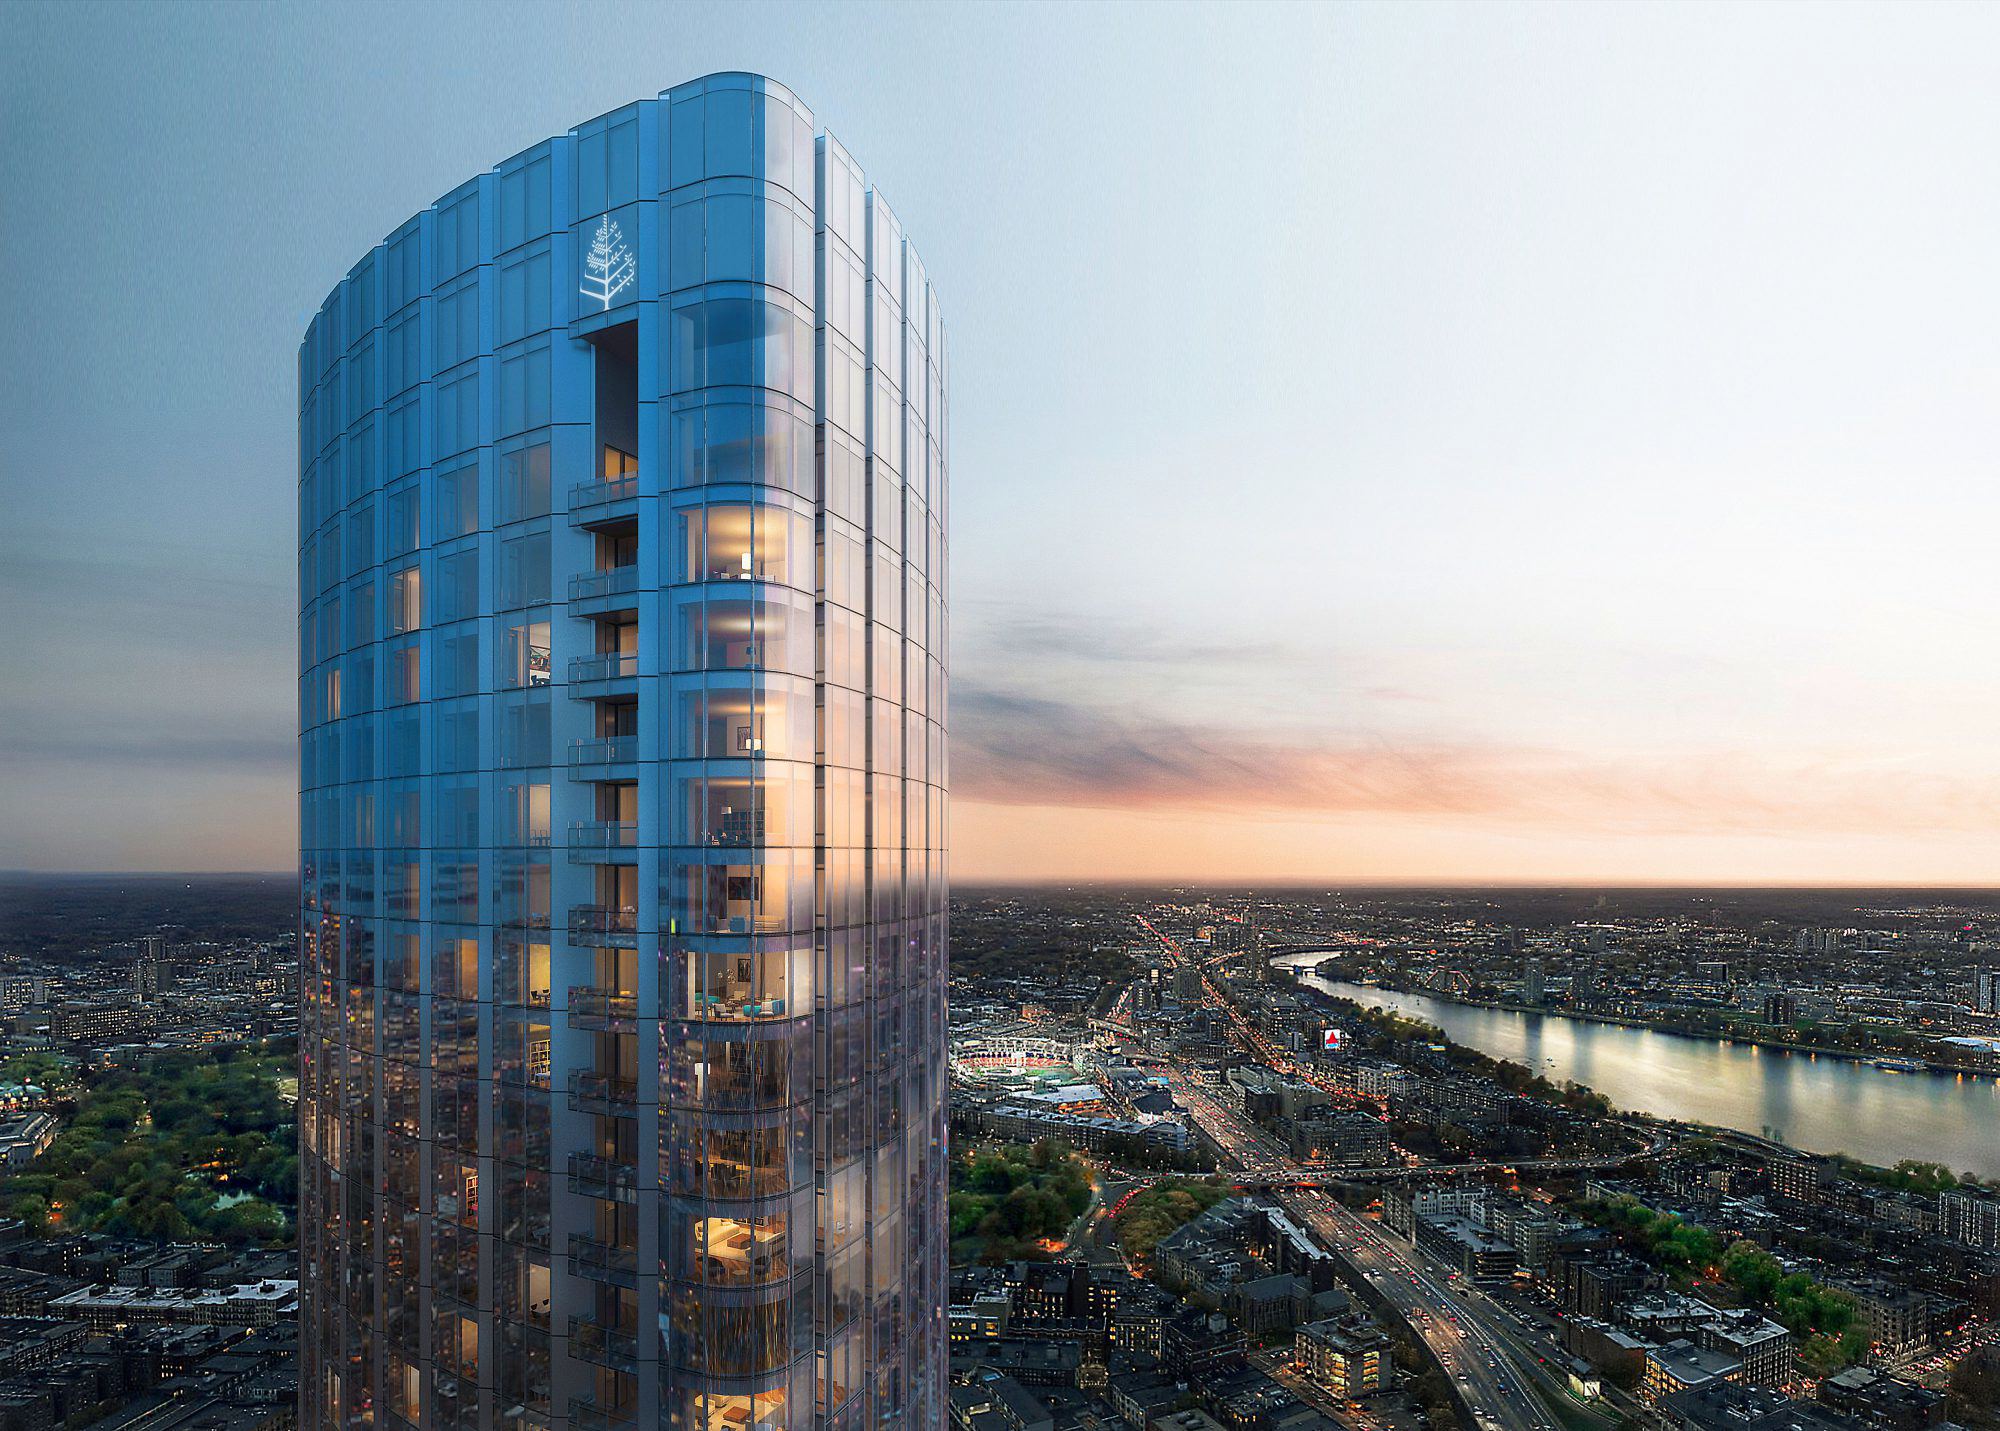 The-60-story-750-million-One-Dalton-luxury-condominium-and-hotel-tower-in-the-Back-Bay-New-Englands-future-tallest-residential-tower-at-740-feet-high